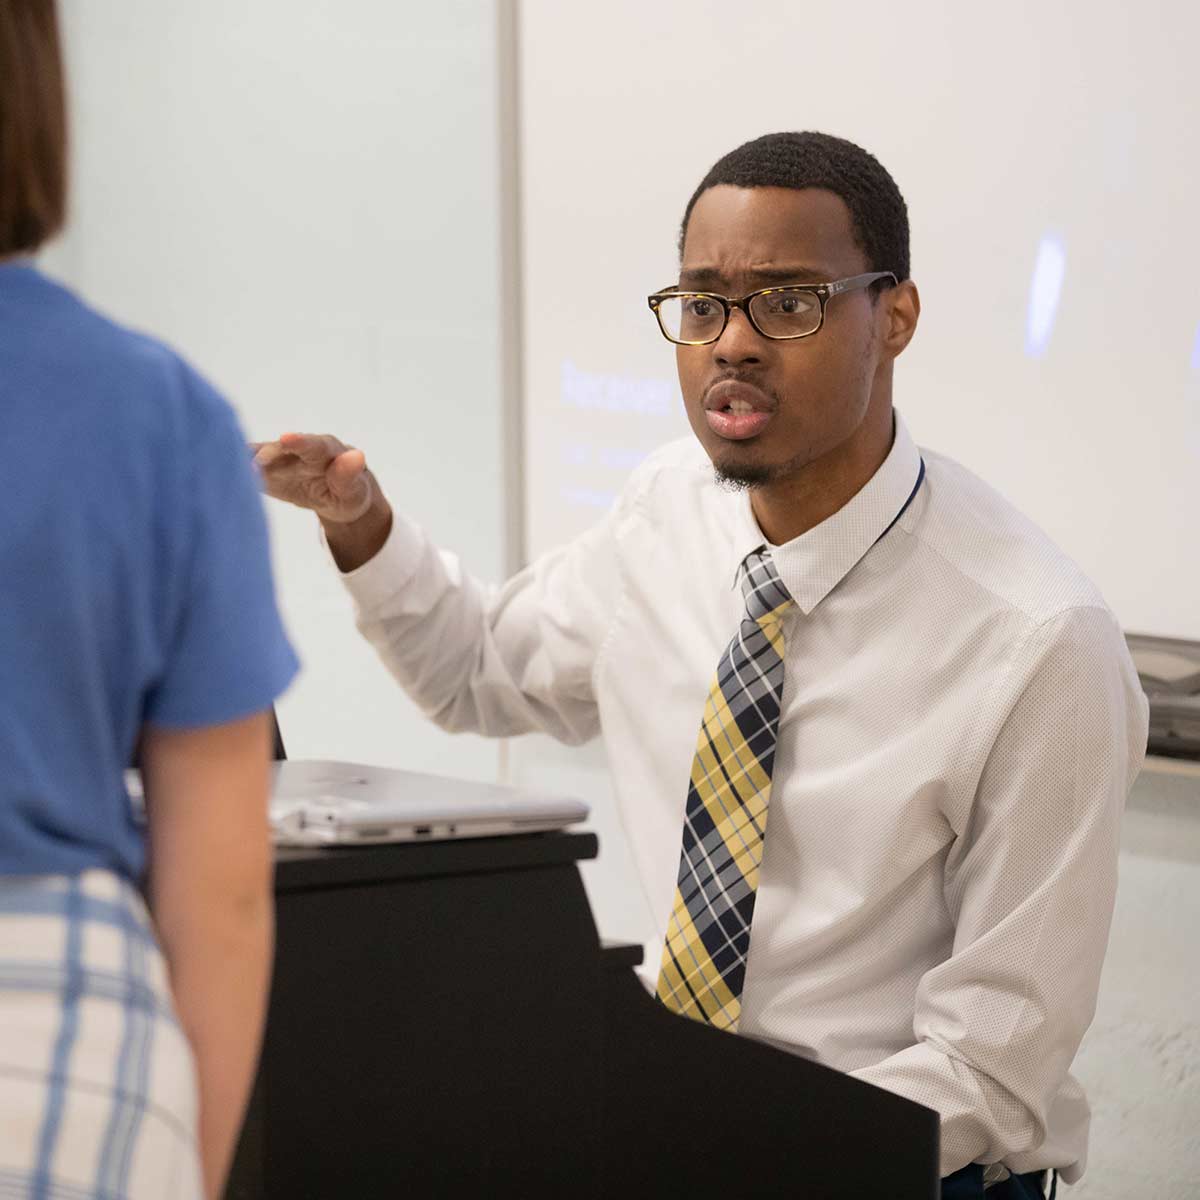 A teacher wearing a white, collared shirt with a tie speaks to a student during class.